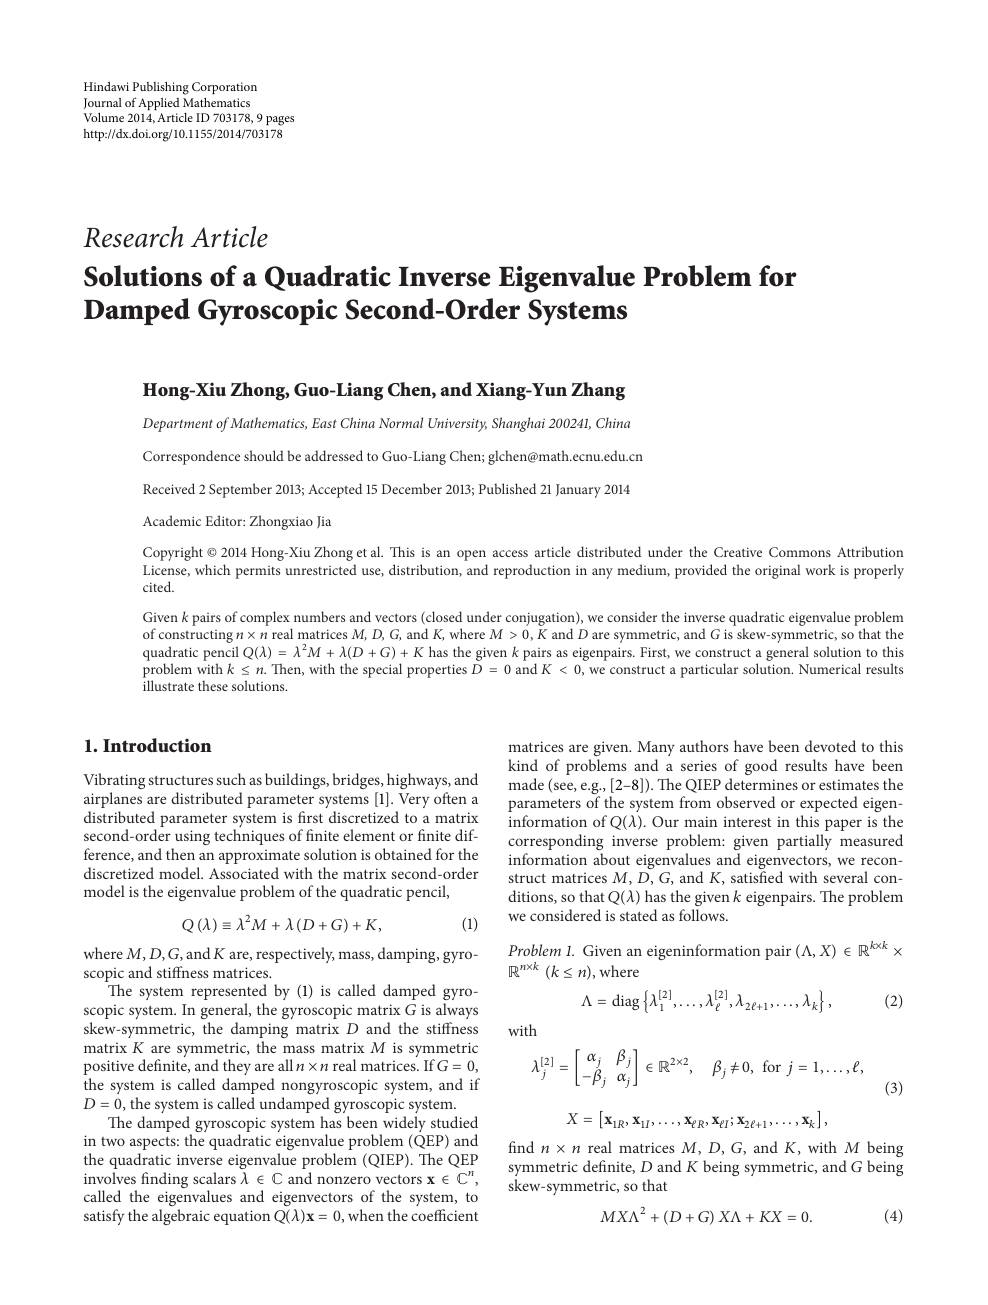 Solutions Of A Quadratic Inverse Eigenvalue Problem For Damped Gyroscopic Second Order Systems Topic Of Research Paper In Mathematics Download Scholarly Article Pdf And Read For Free On Cyberleninka Open Science Hub